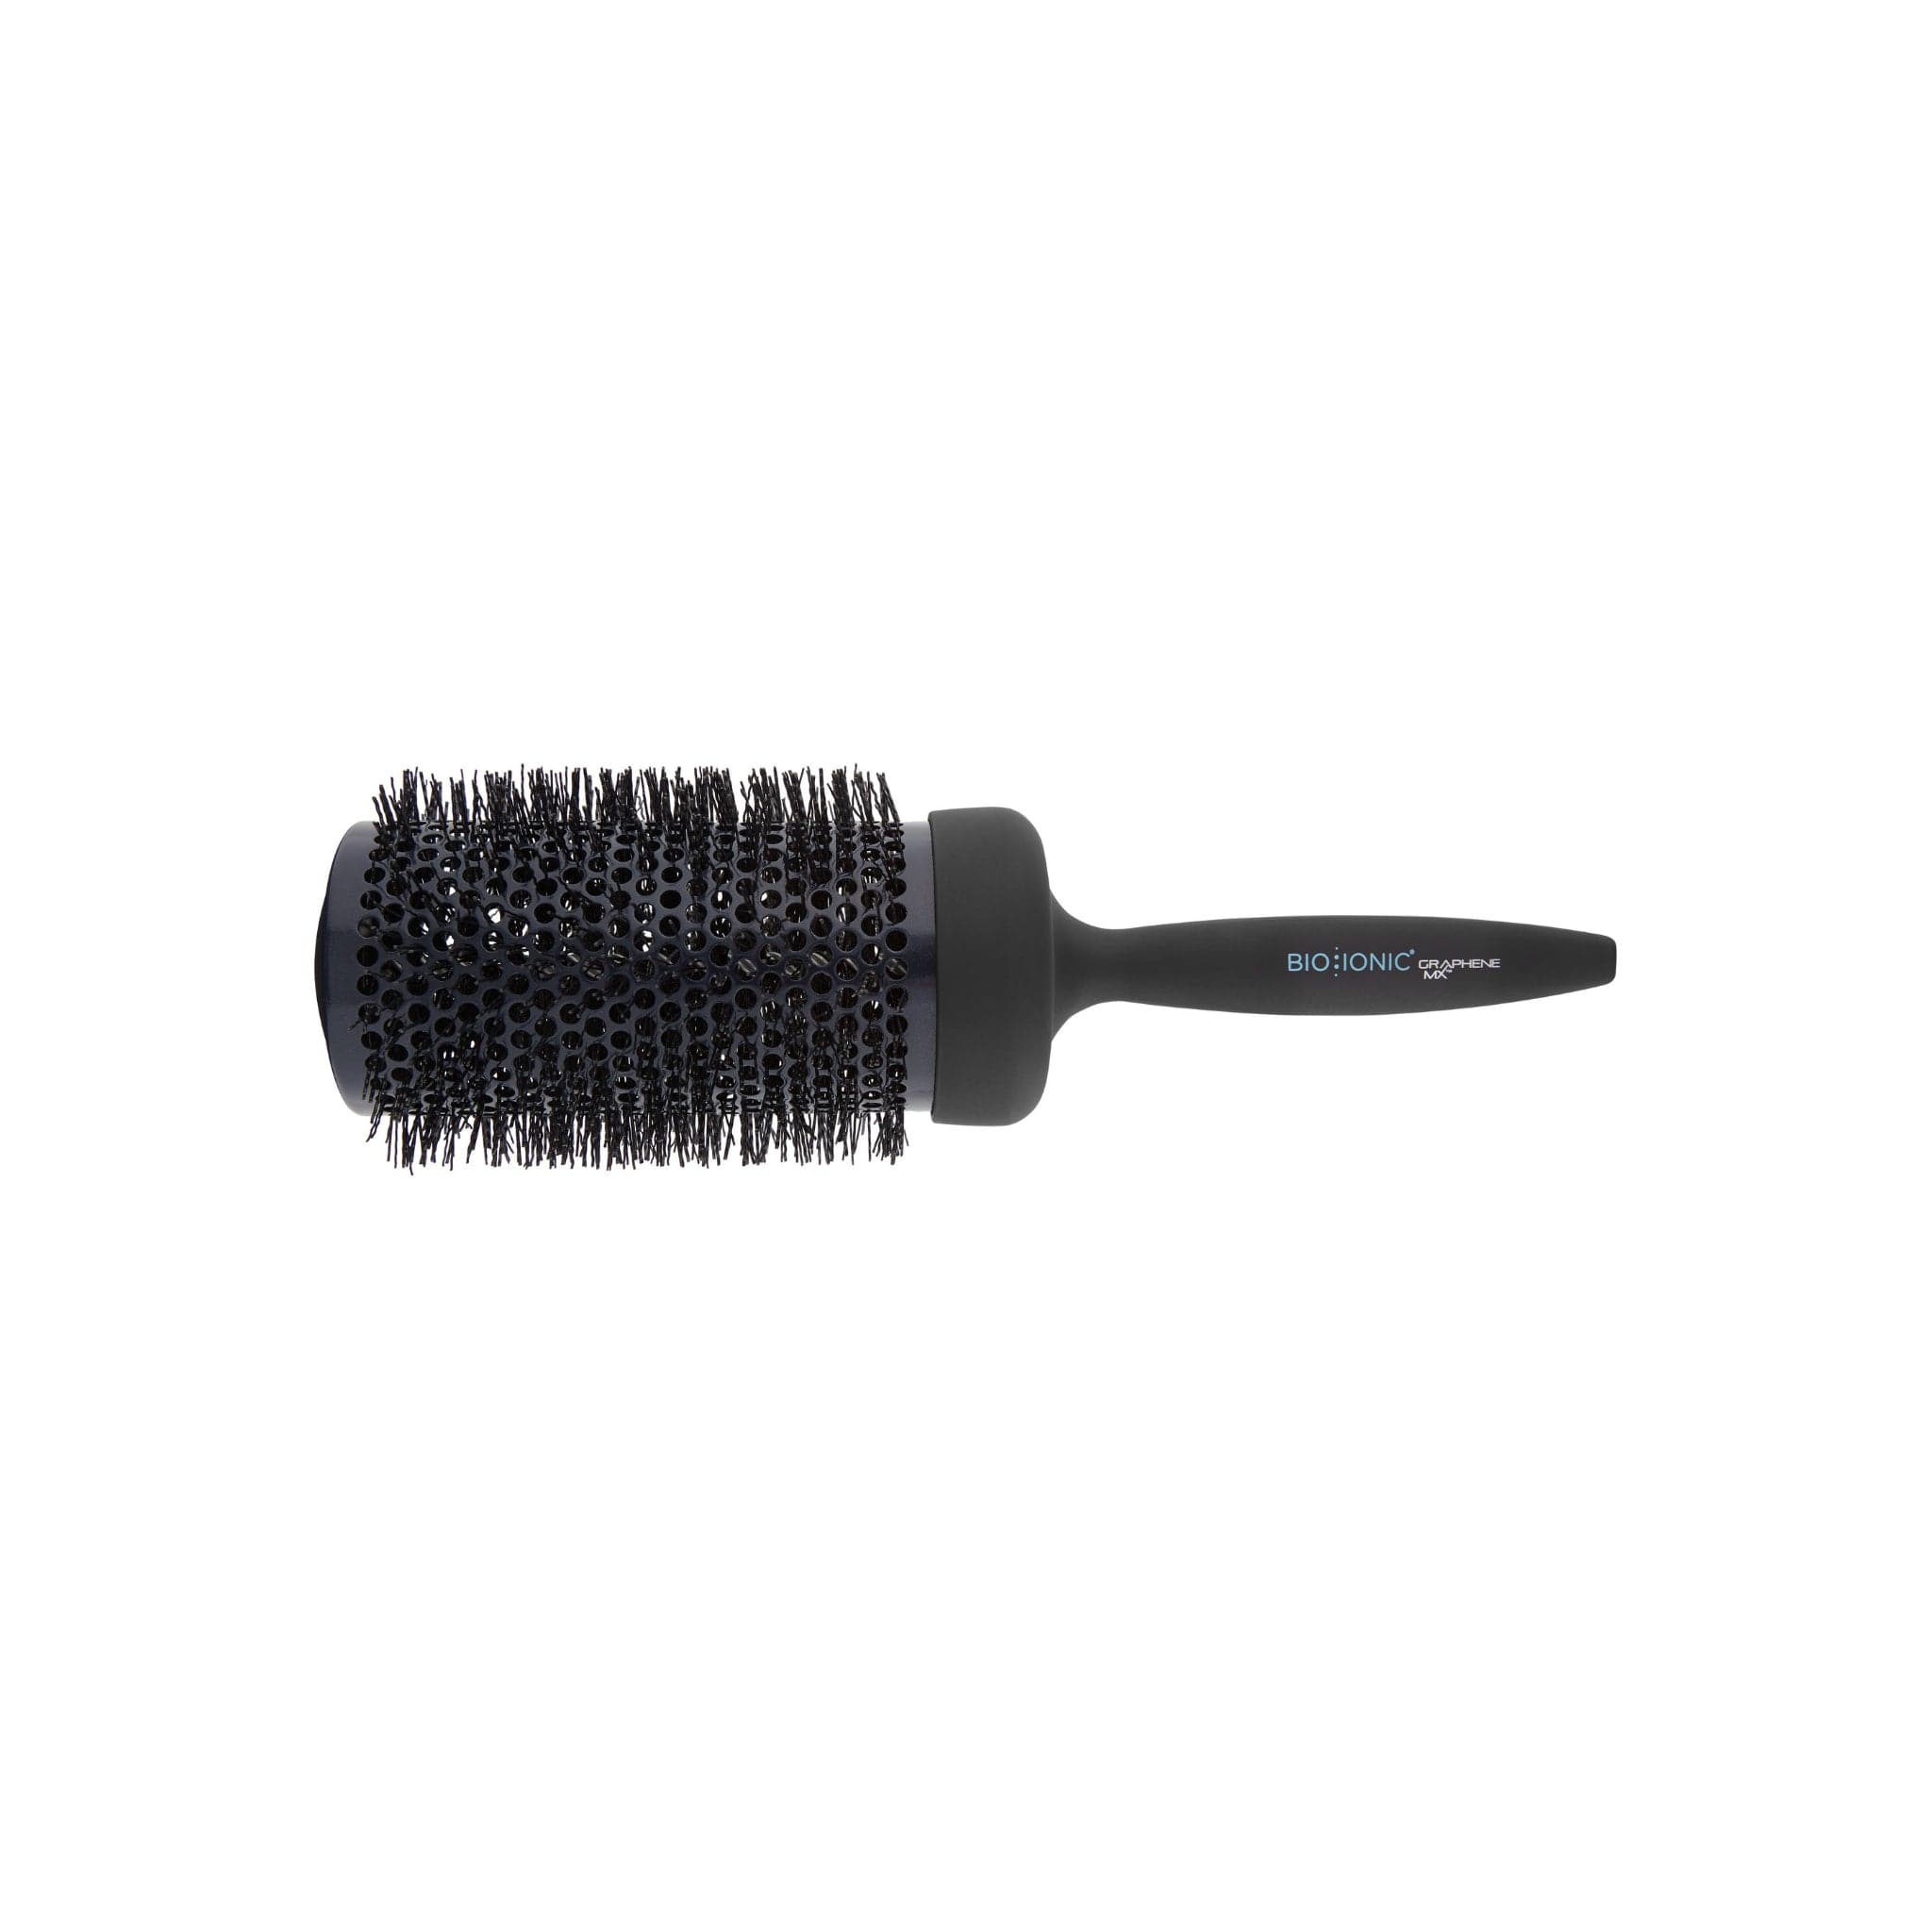 MX Thermal Styling Brush